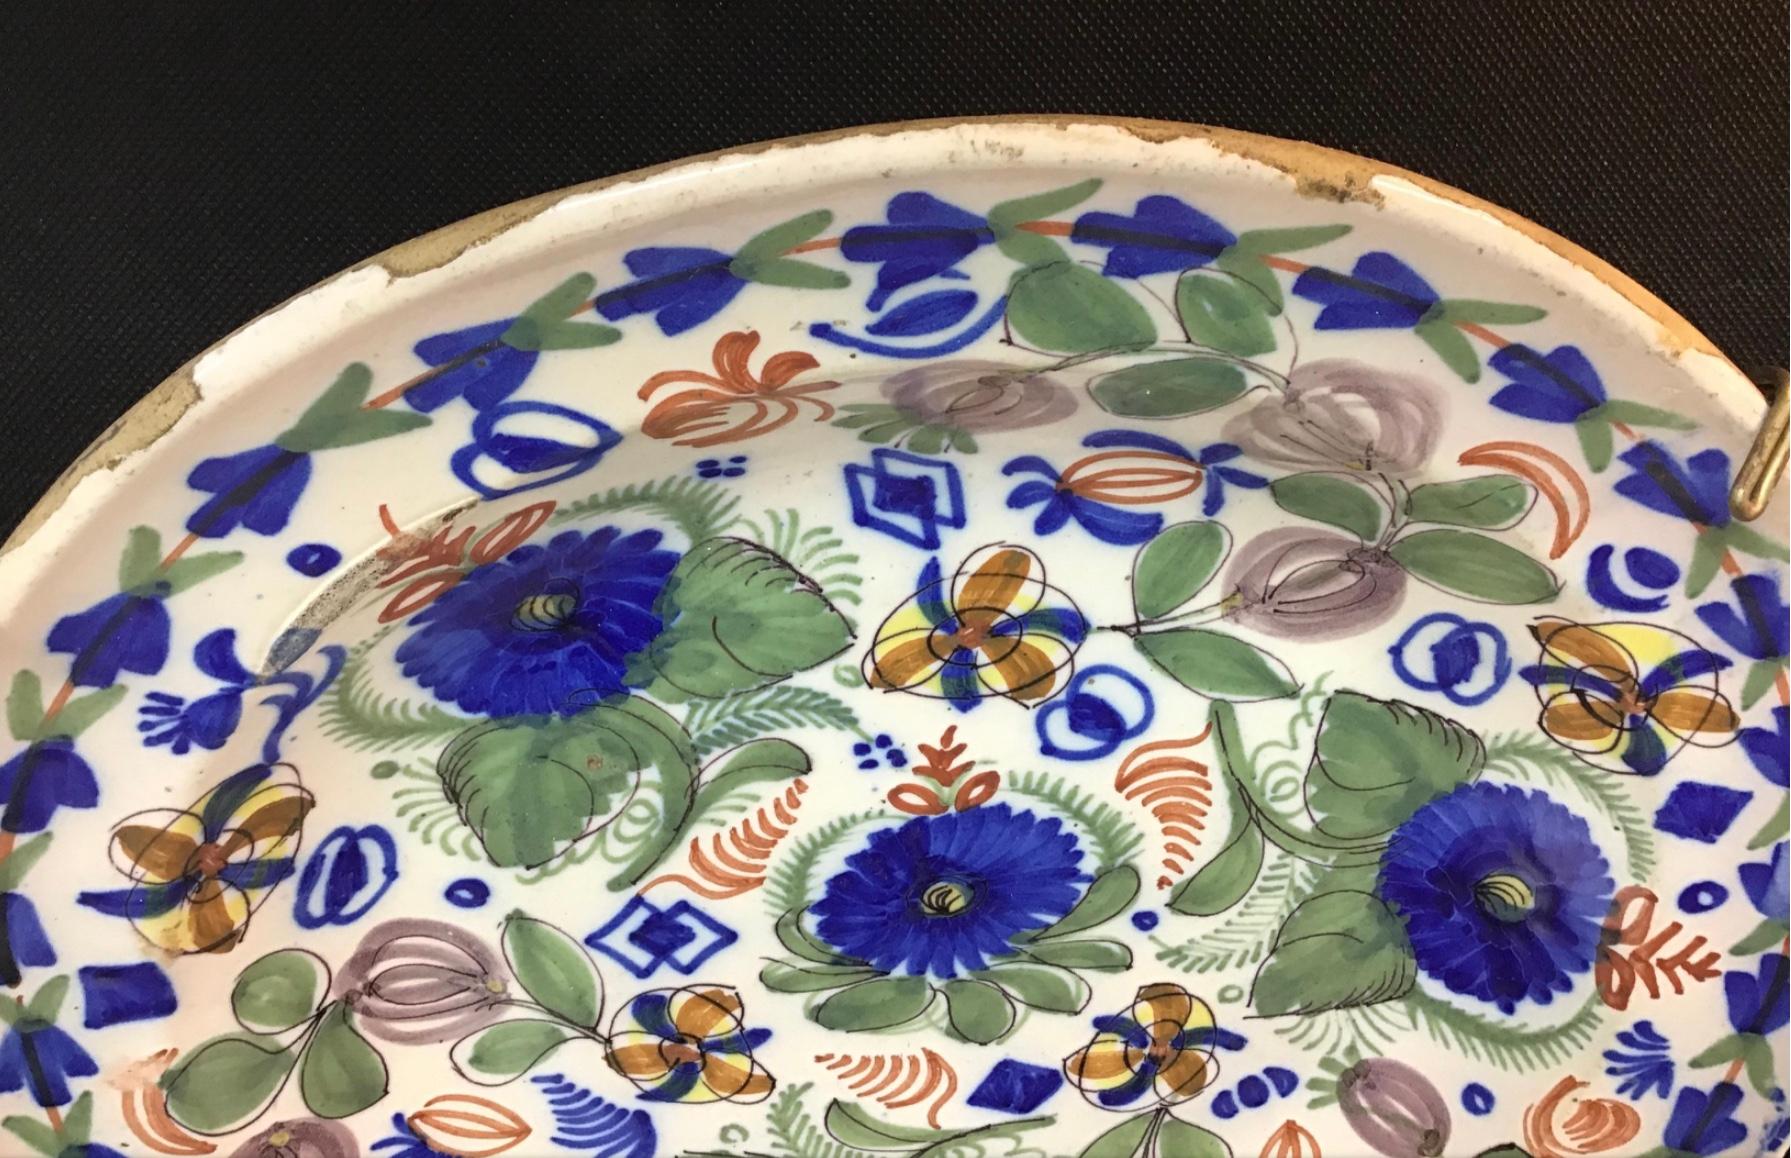 Dutch Colonial 18th Century Spanish Delft Charger